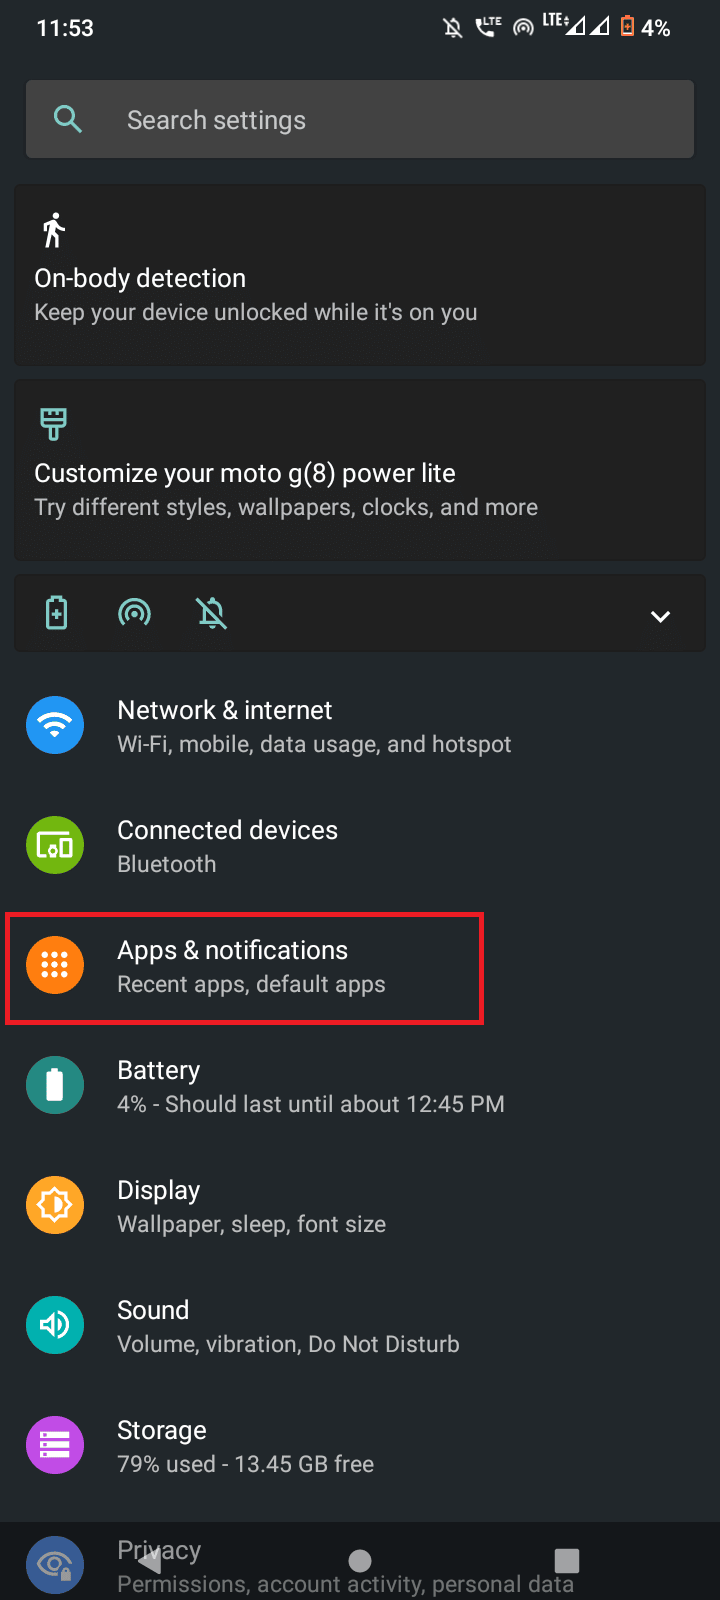 Tap on Apps and notifications